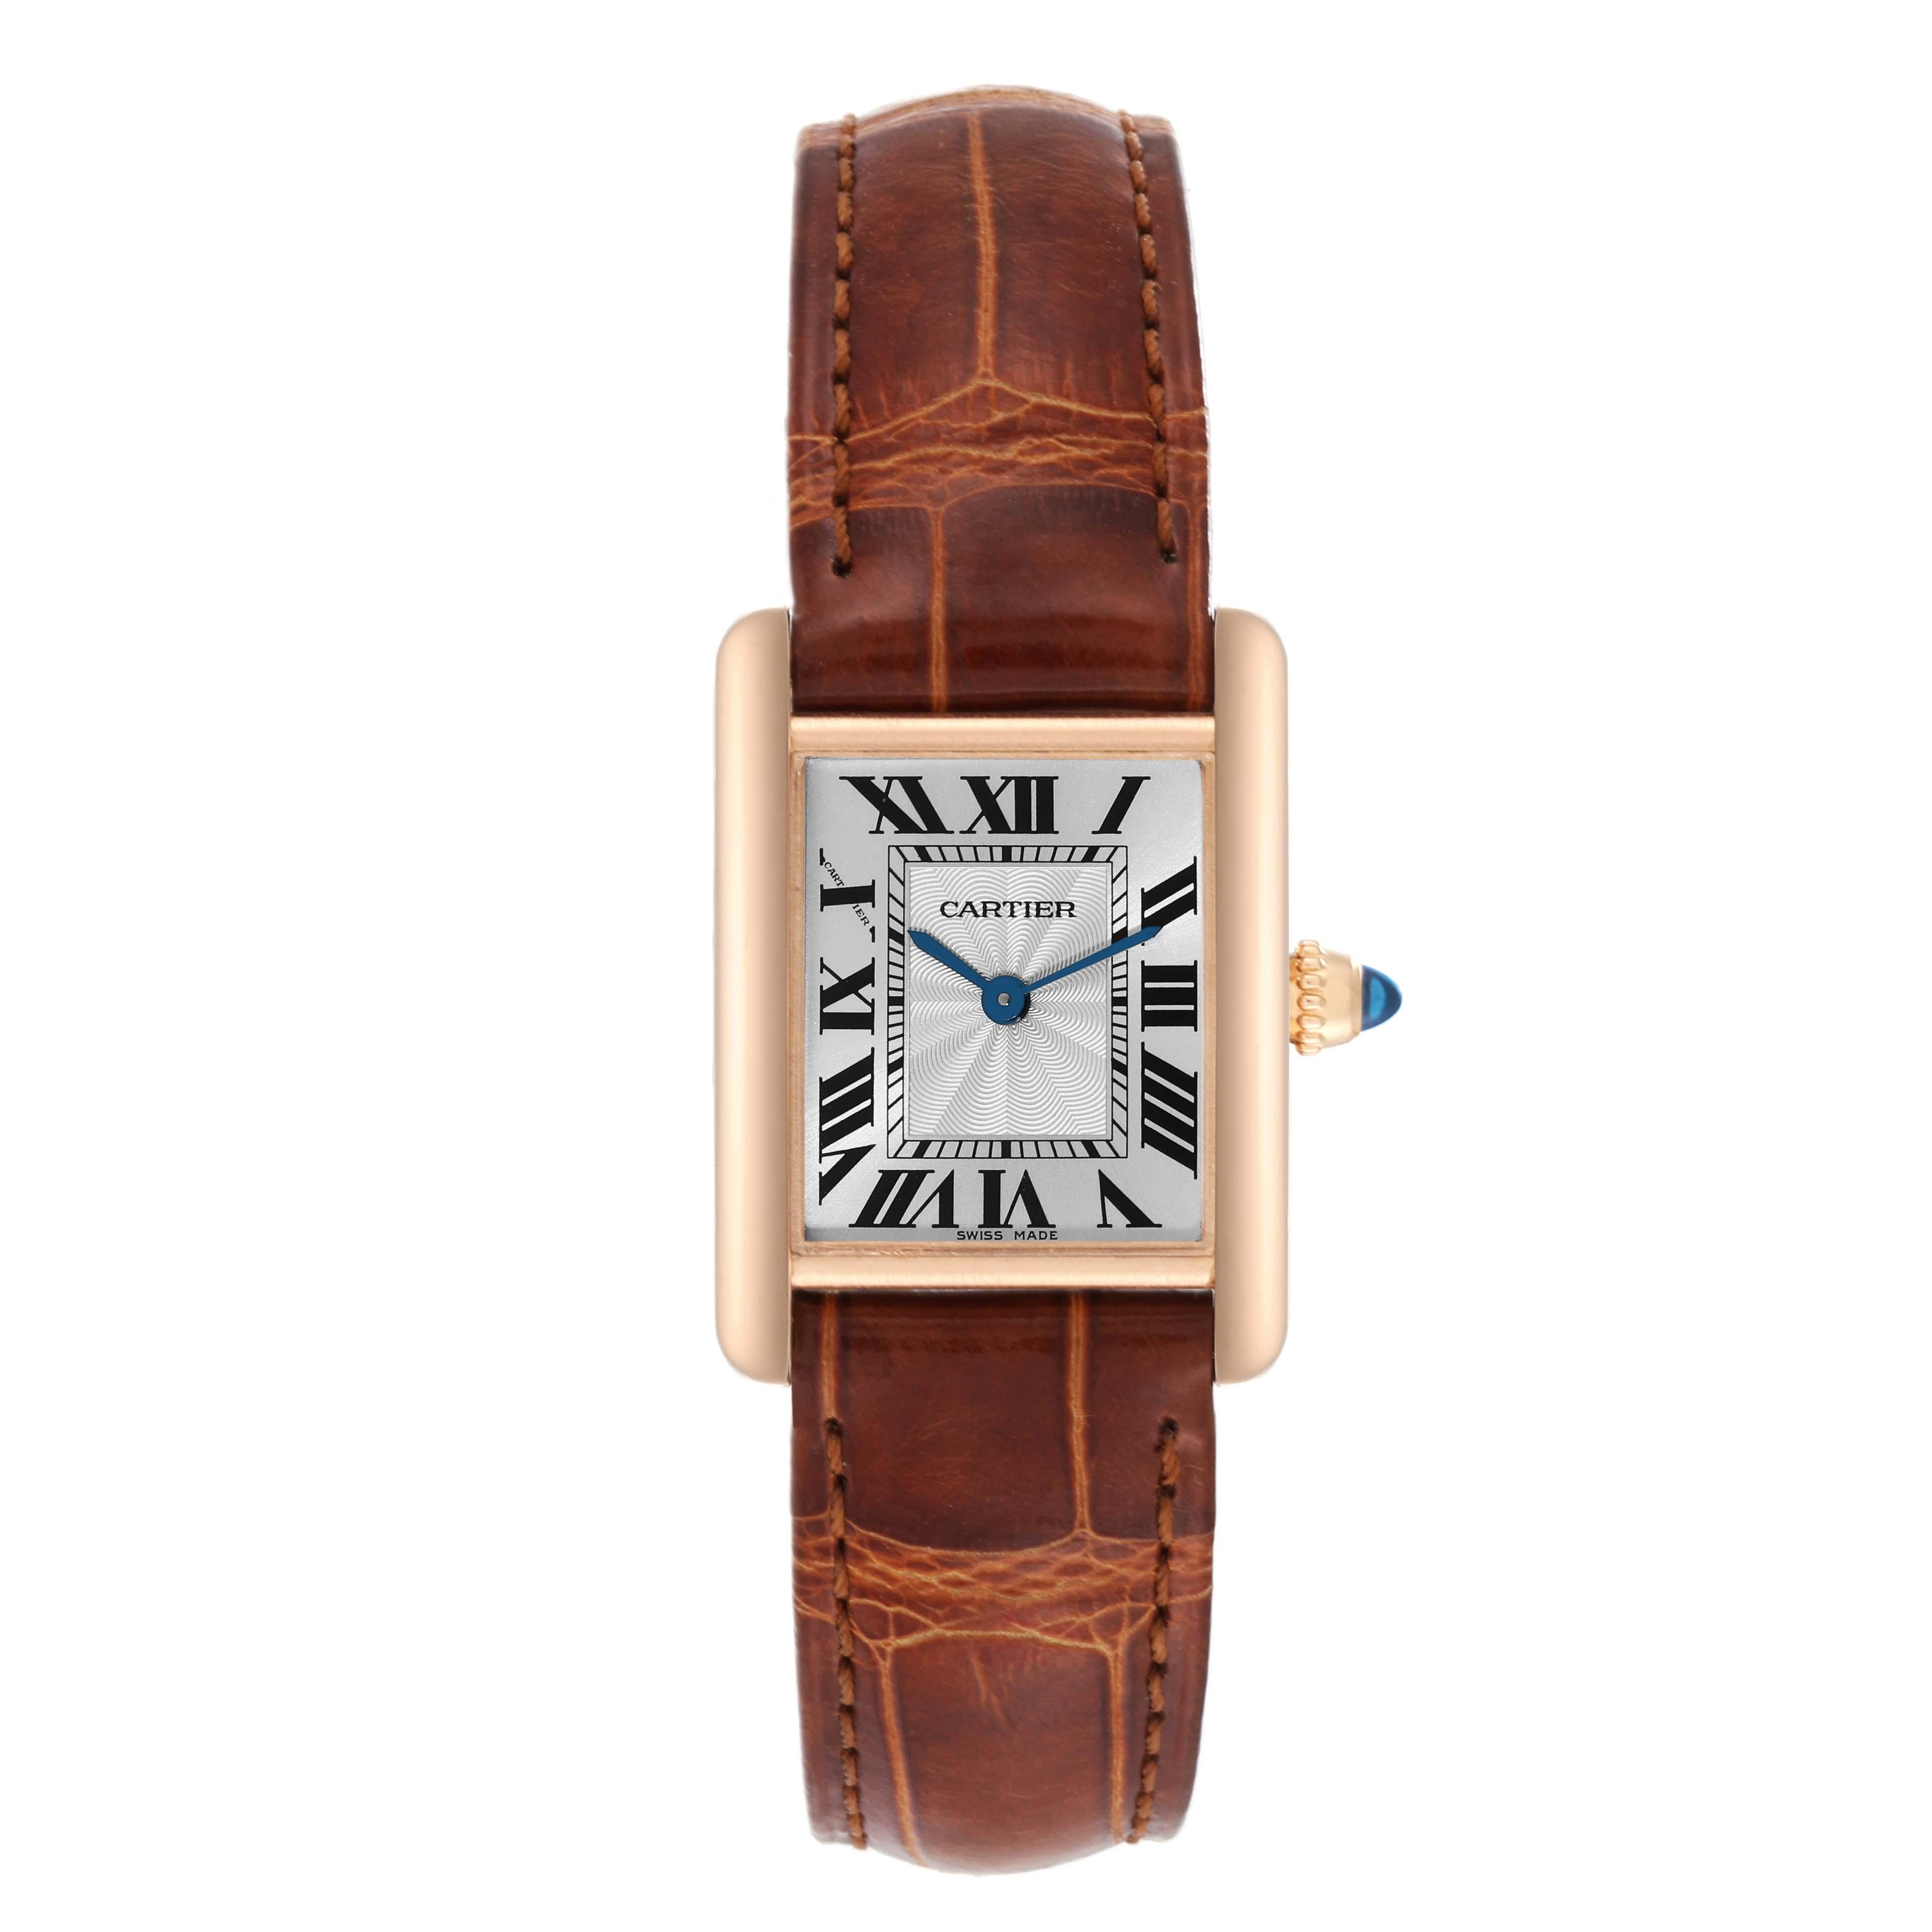 Cartier Tank Louis Rose Gold Mechanical Ladies Watch WGTA0010 Papers. Manual winding movement. 18k rose gold case 29.5 x 22.0 mm. Circular grained crown set with the blue sapphire cabochon. . Scratch resistant sapphire crystal. Silvered guilloche